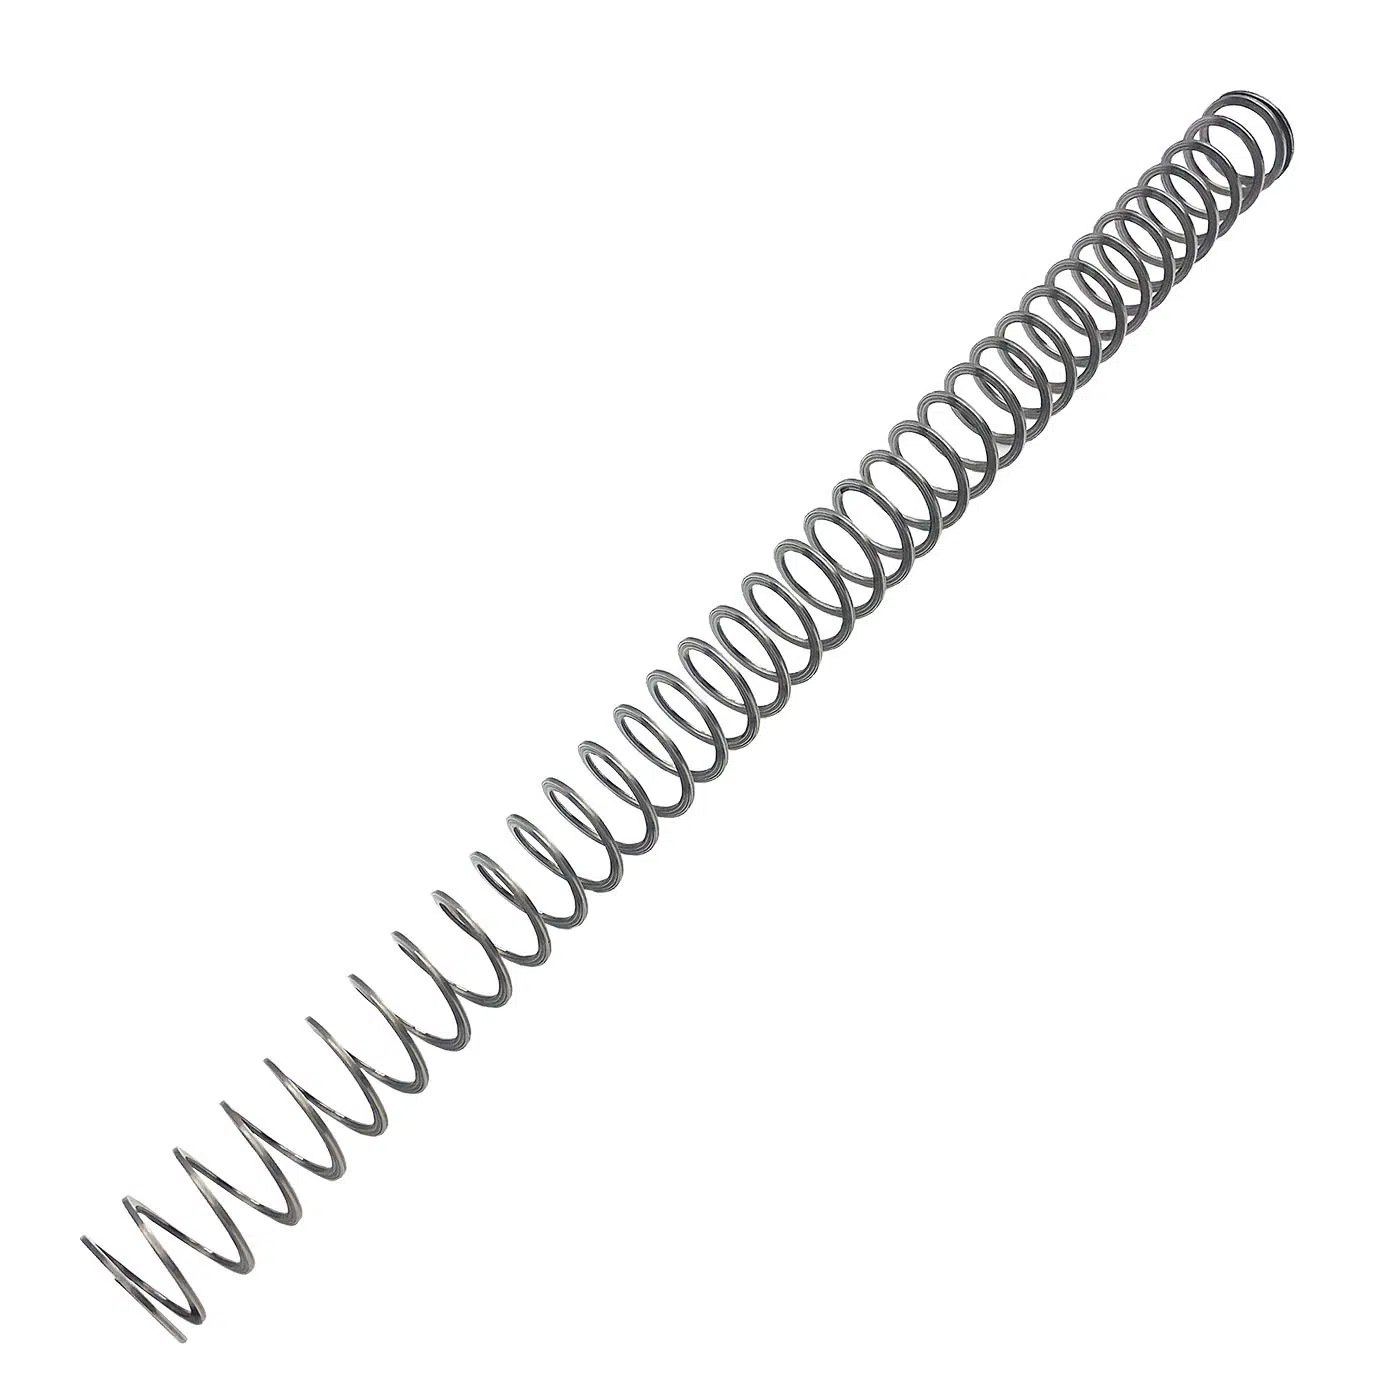 17-7 Stainless Steel Flatwire AR-15 Spring